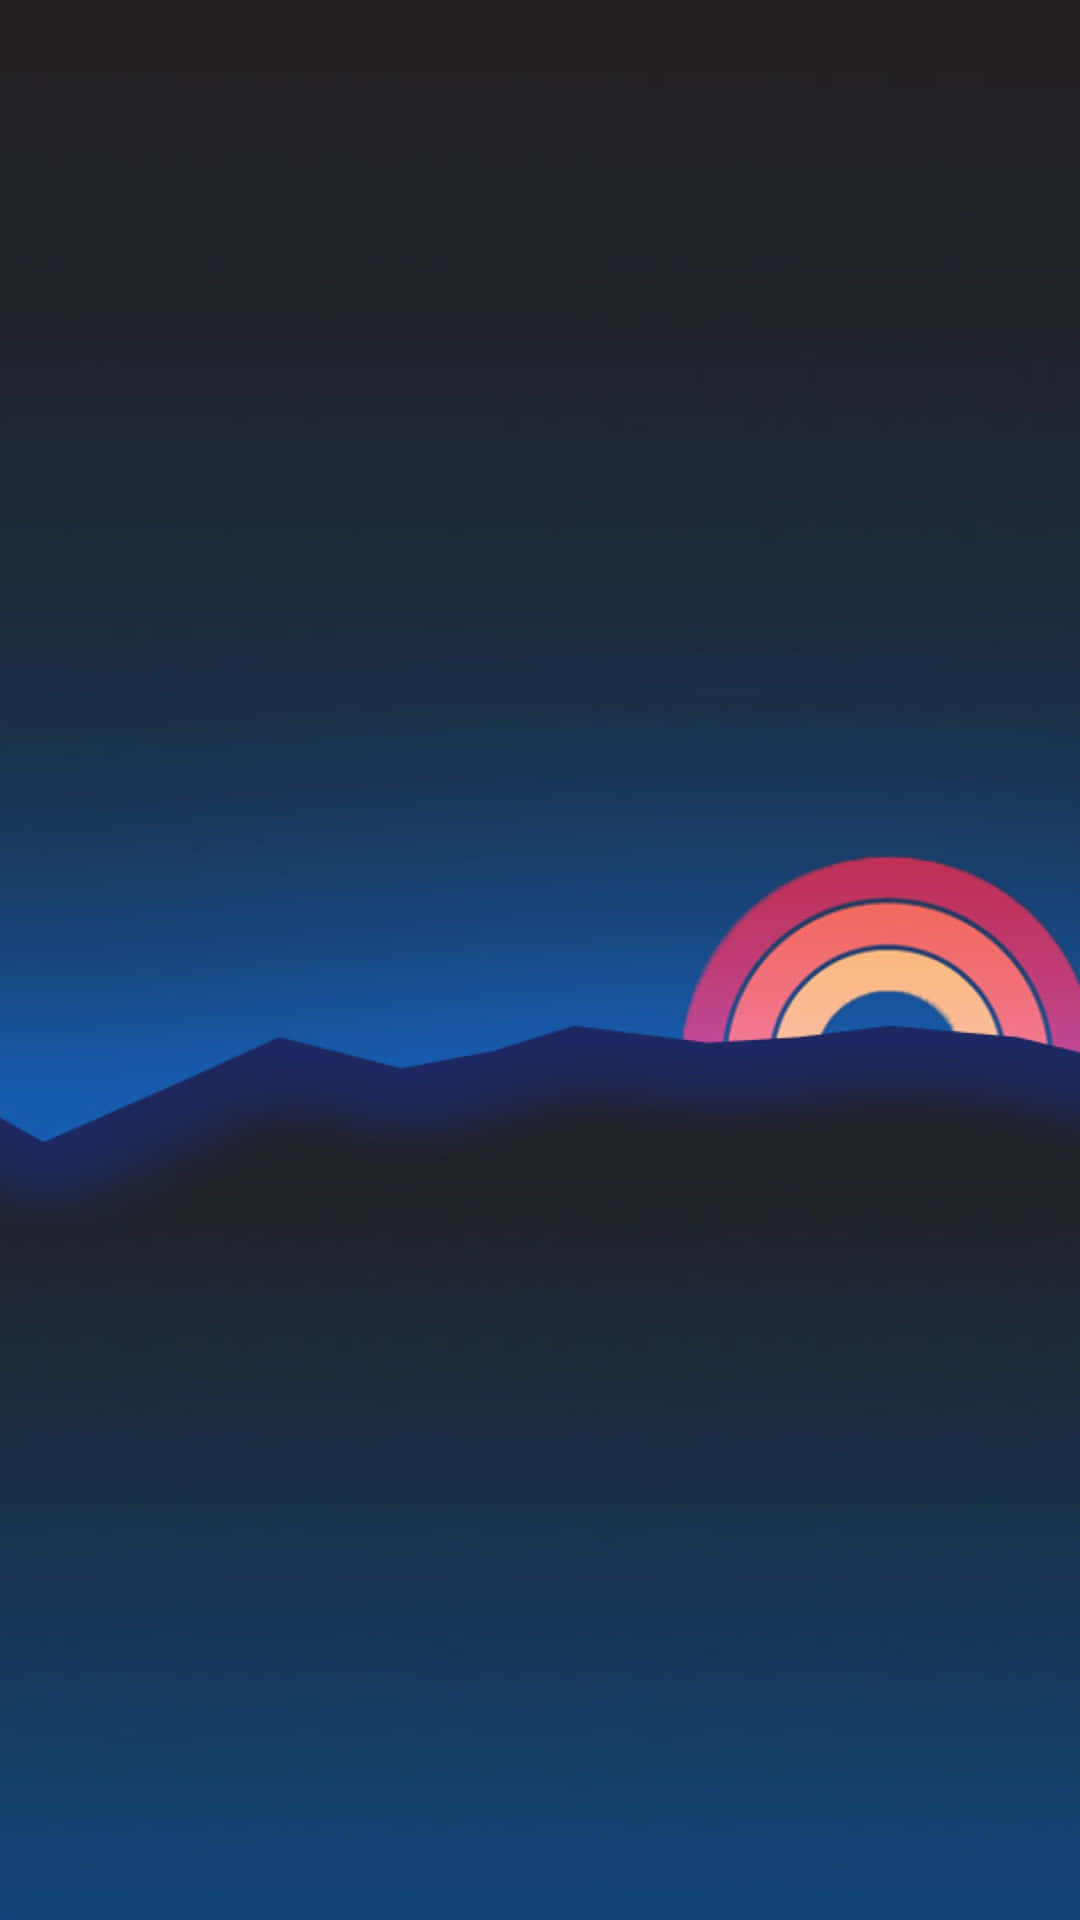 Take a moment to appreciate the calming beauty of a retro sunset. Wallpaper